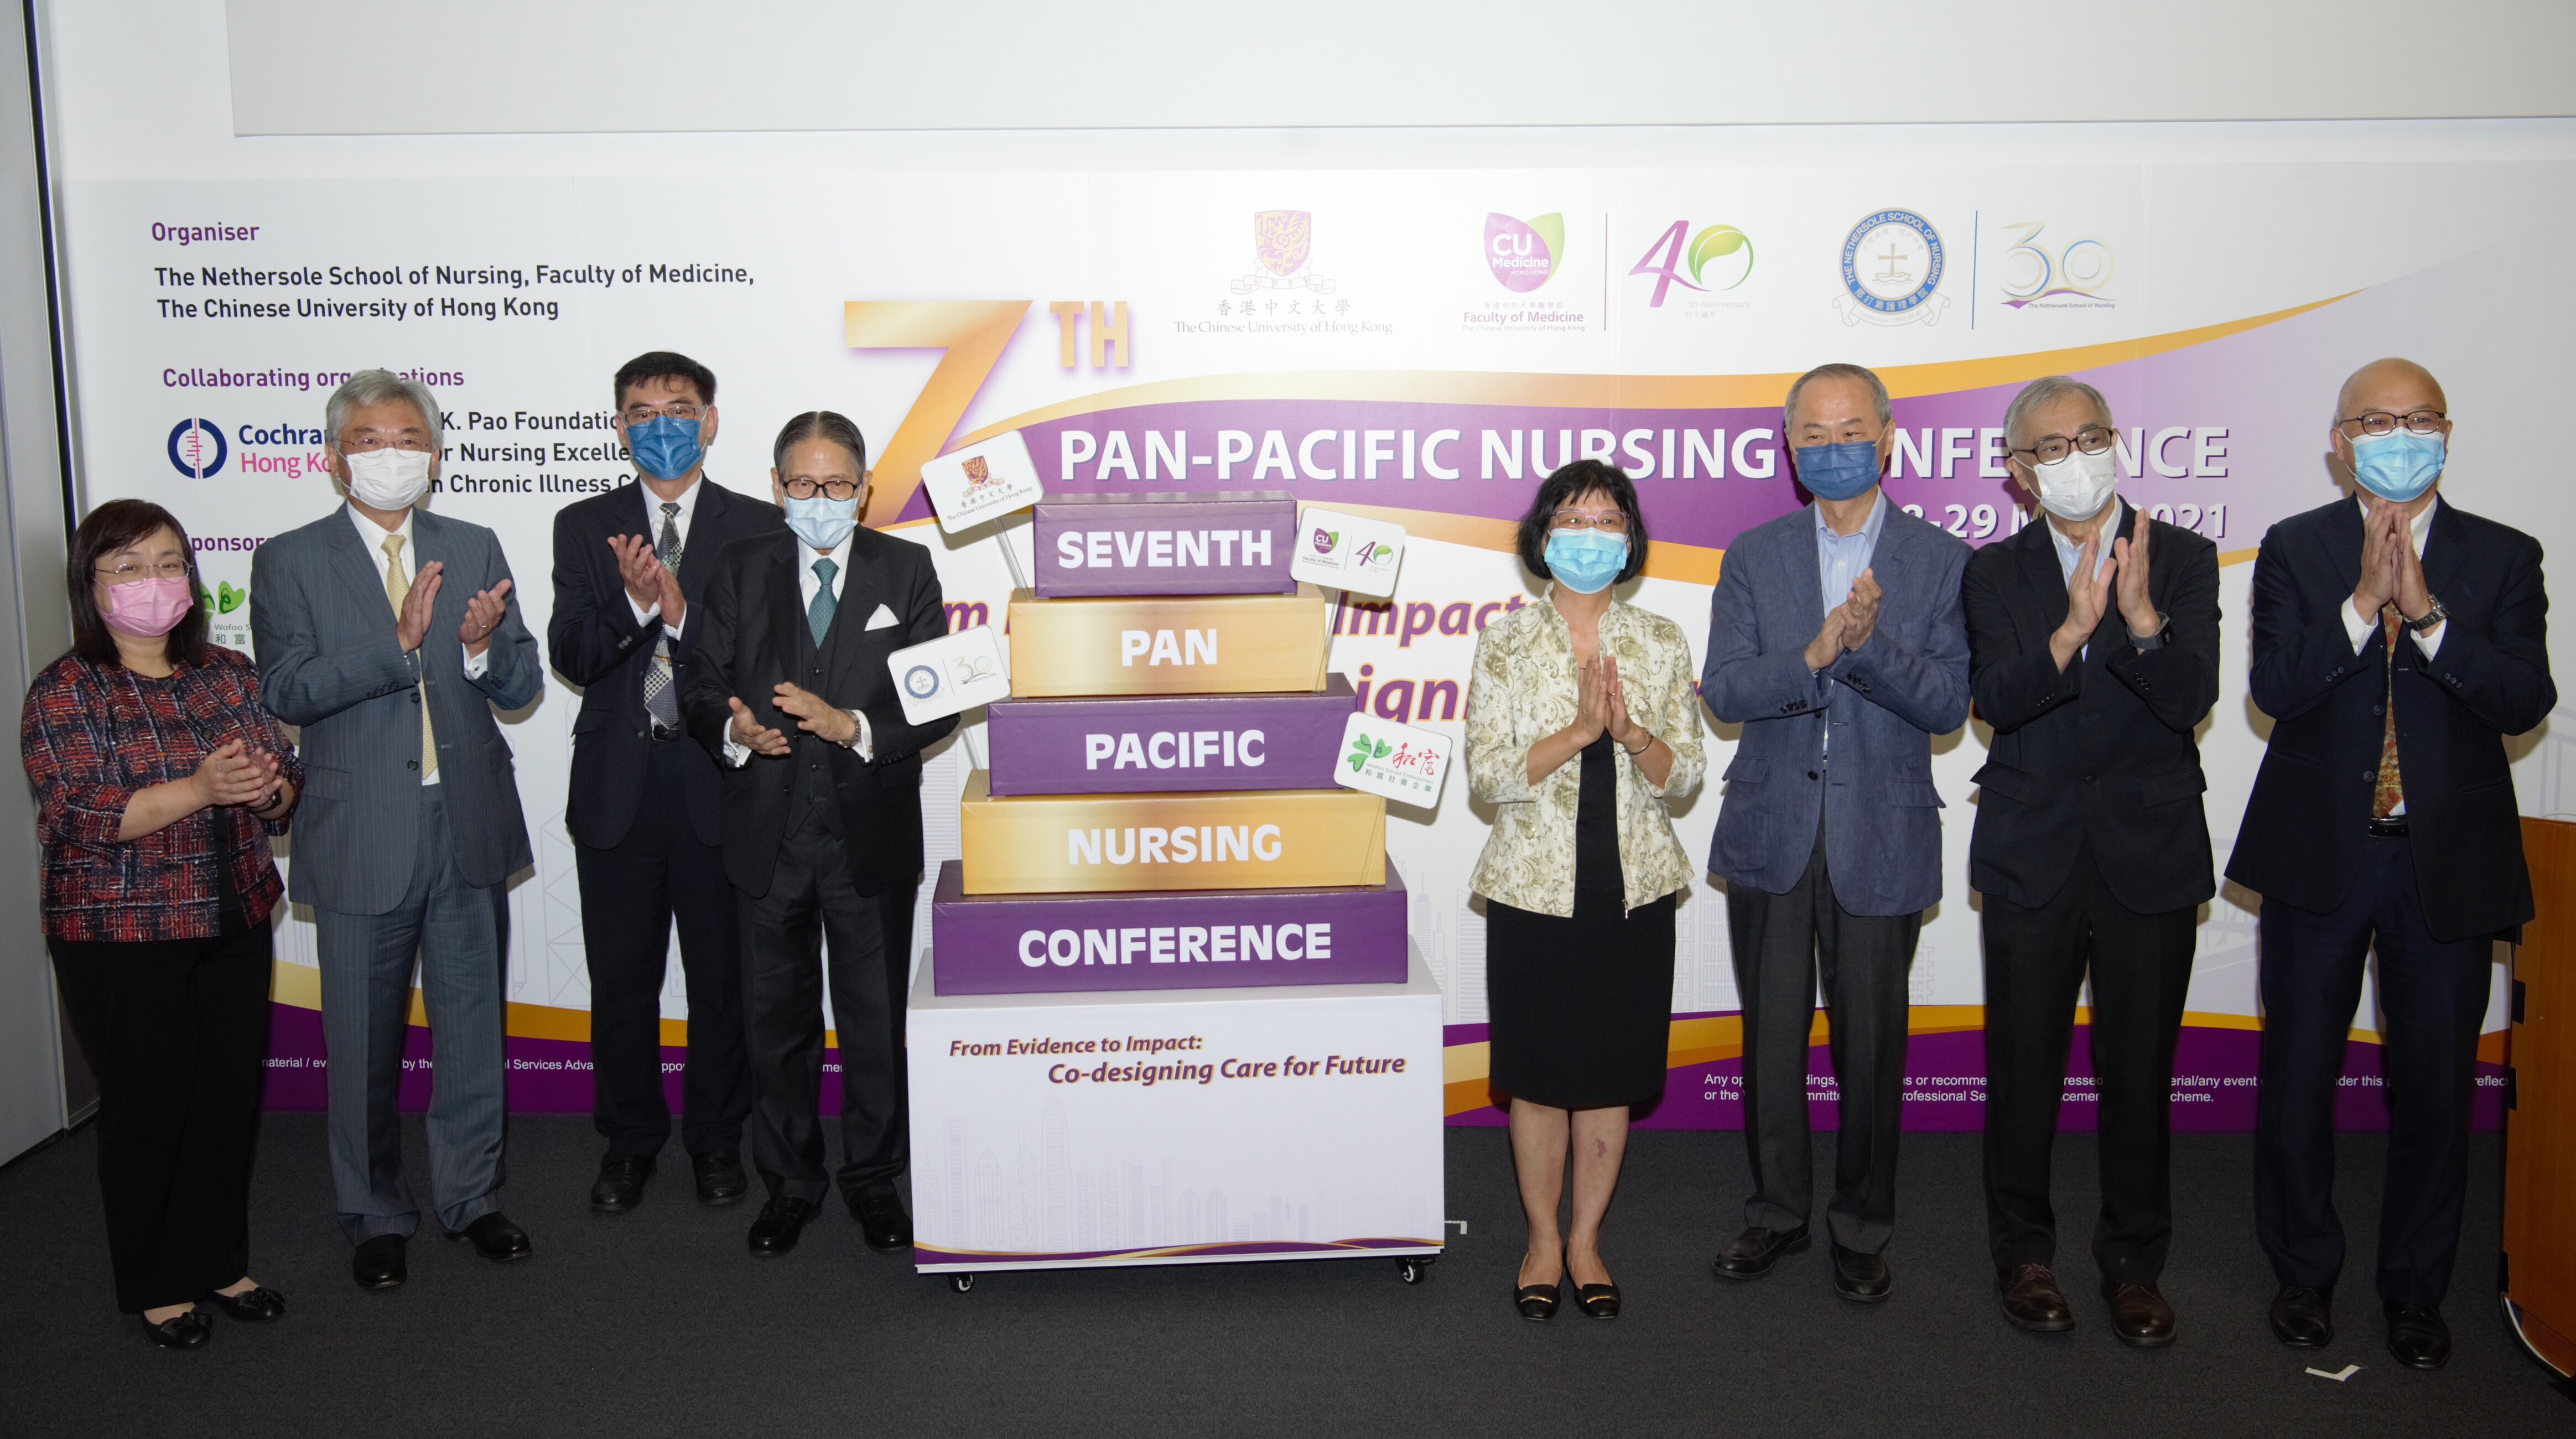 7th Pan-Pacific Nursing Conference